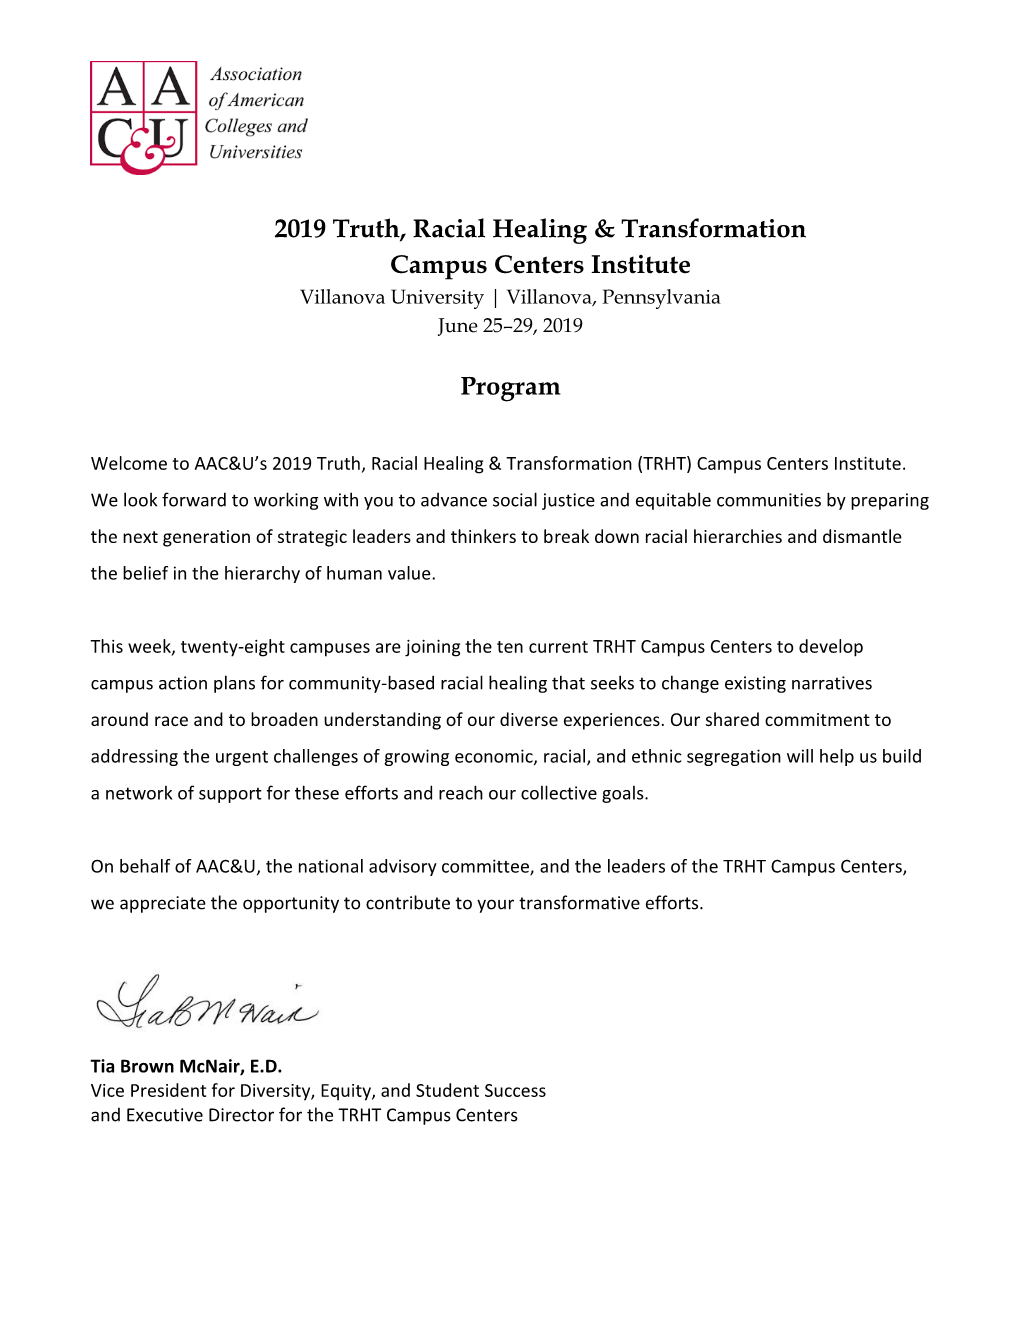 2019 Truth, Racial Healing & Transformation Campus Centers